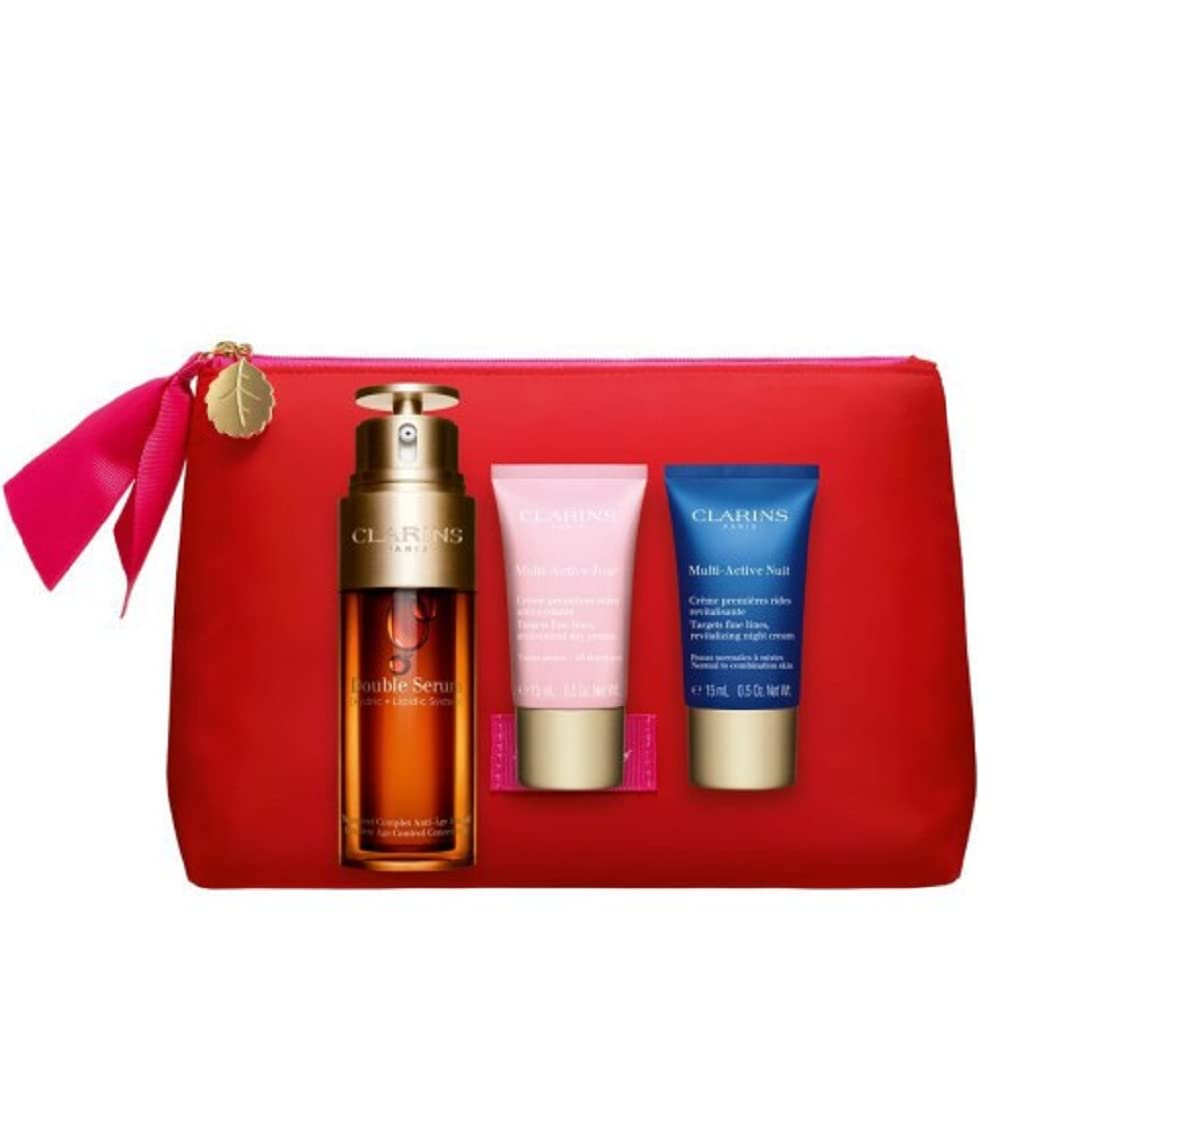 Clarins 3-piece double serum and multi-active collection in box